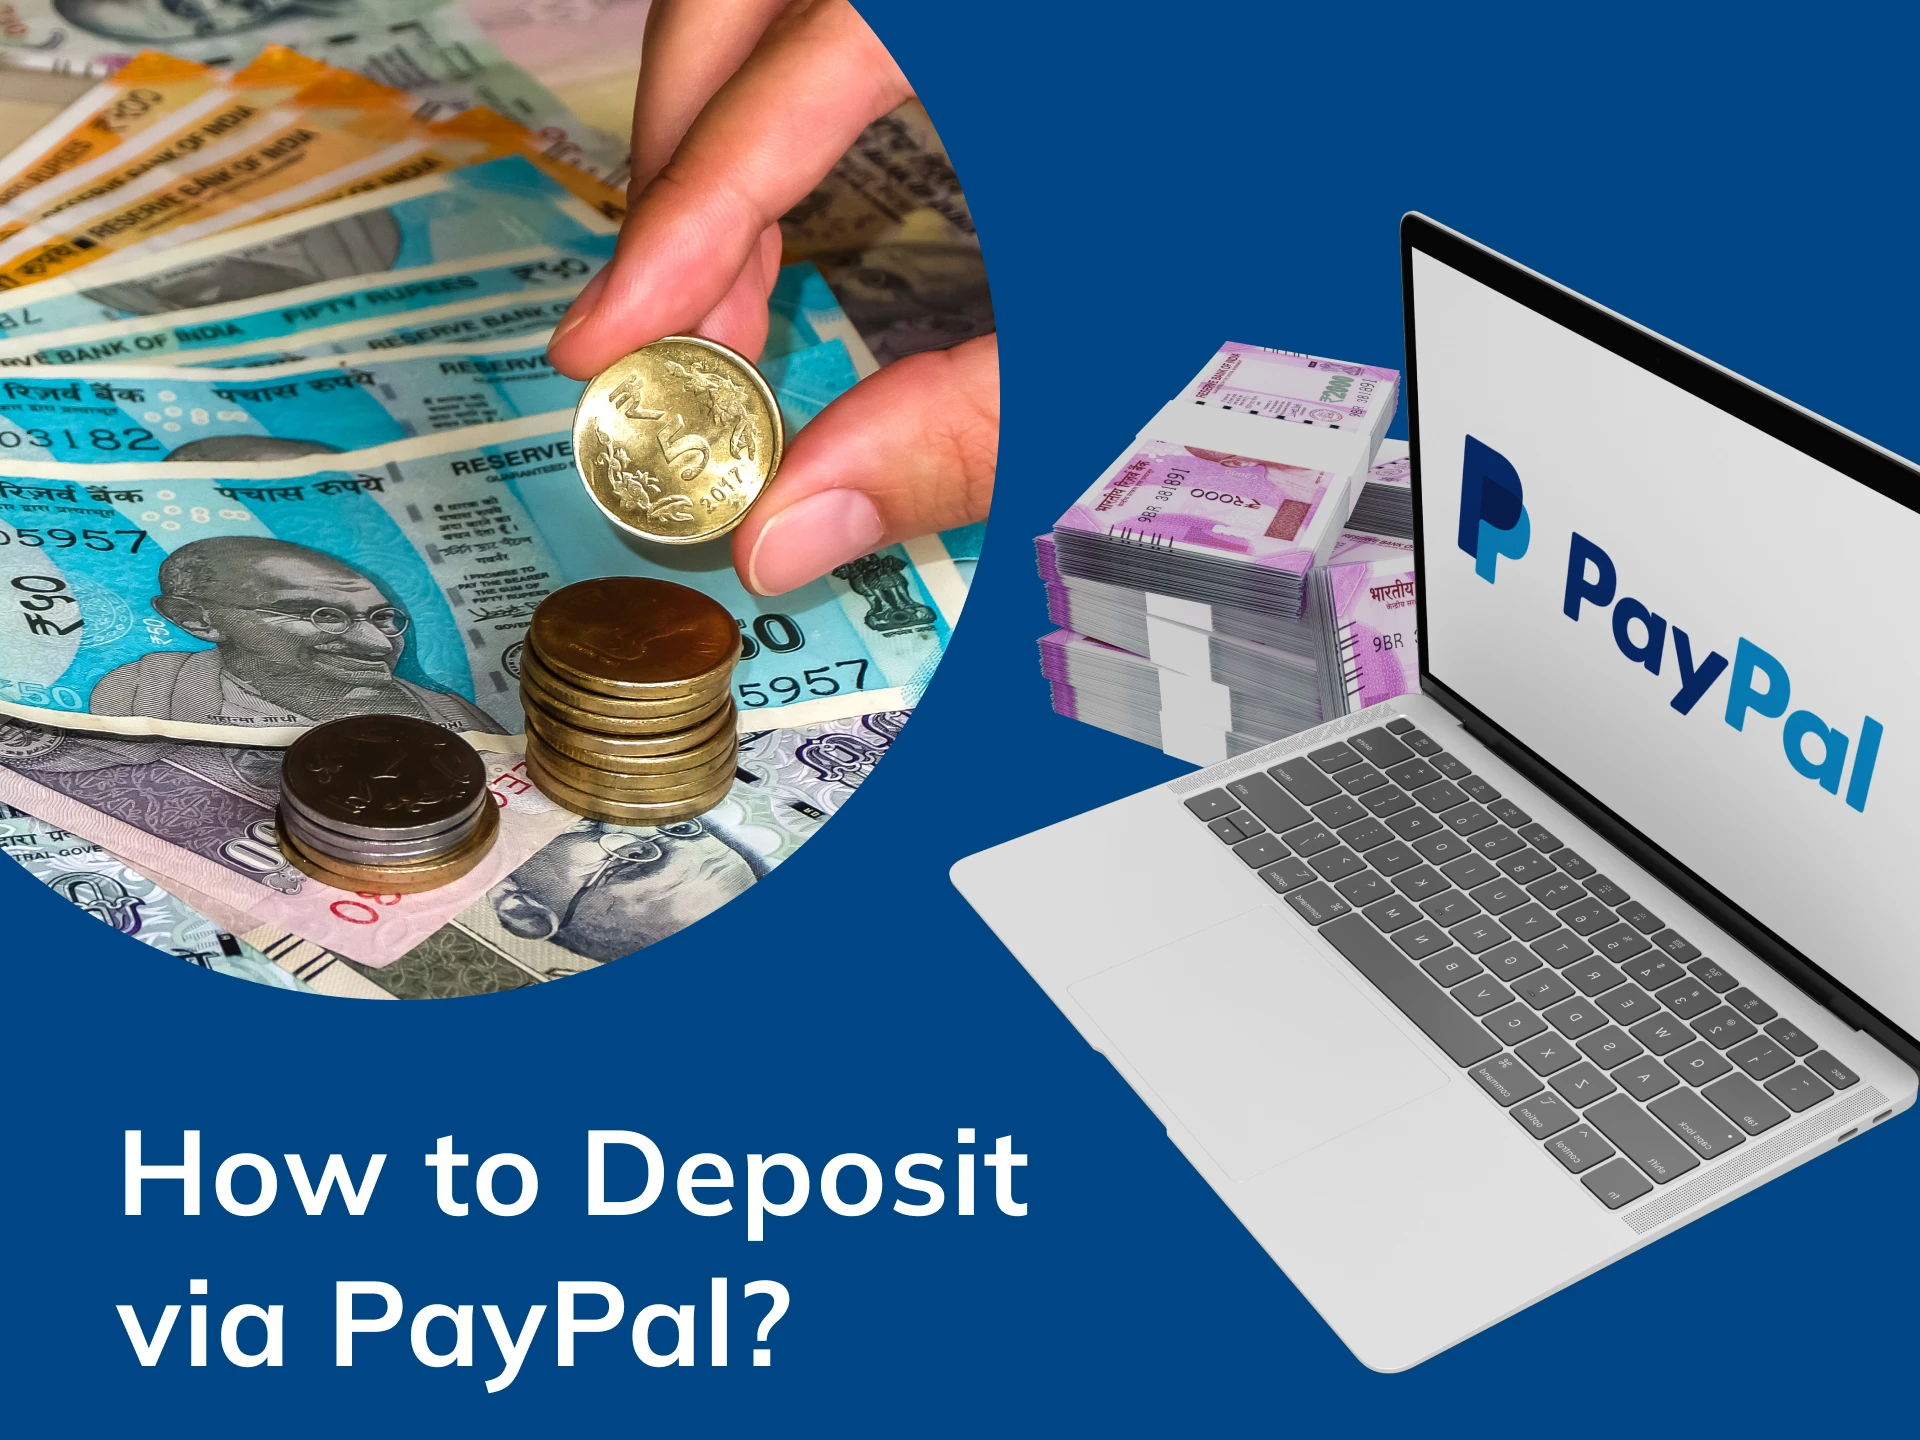 Find out how to deposit money via PayPal into your online casino account.